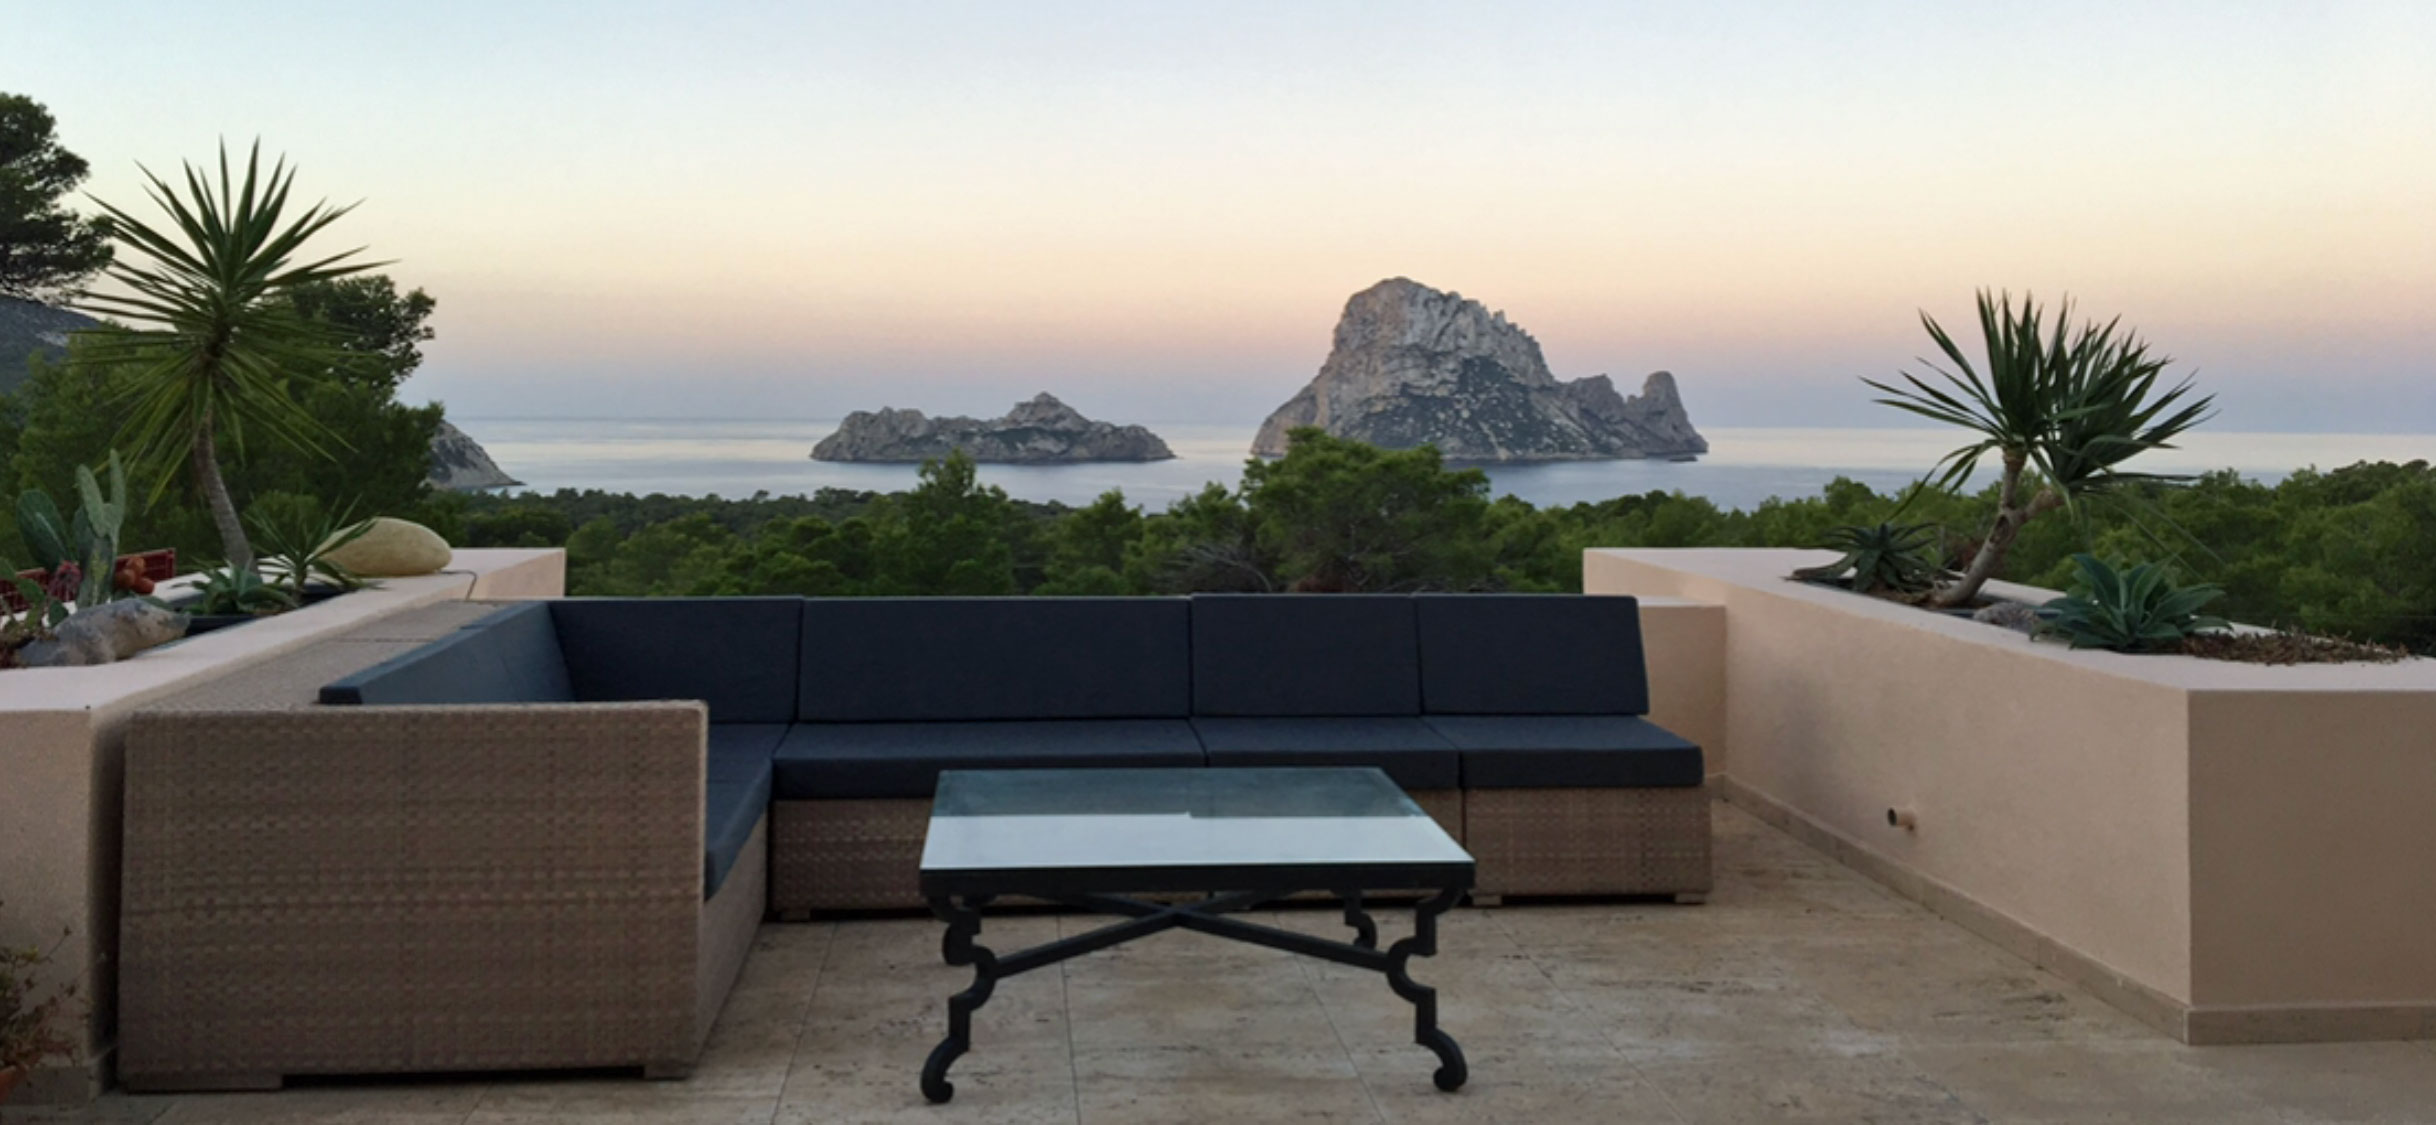 SOLD: Unique apartment with a direct view of the Es Vedra